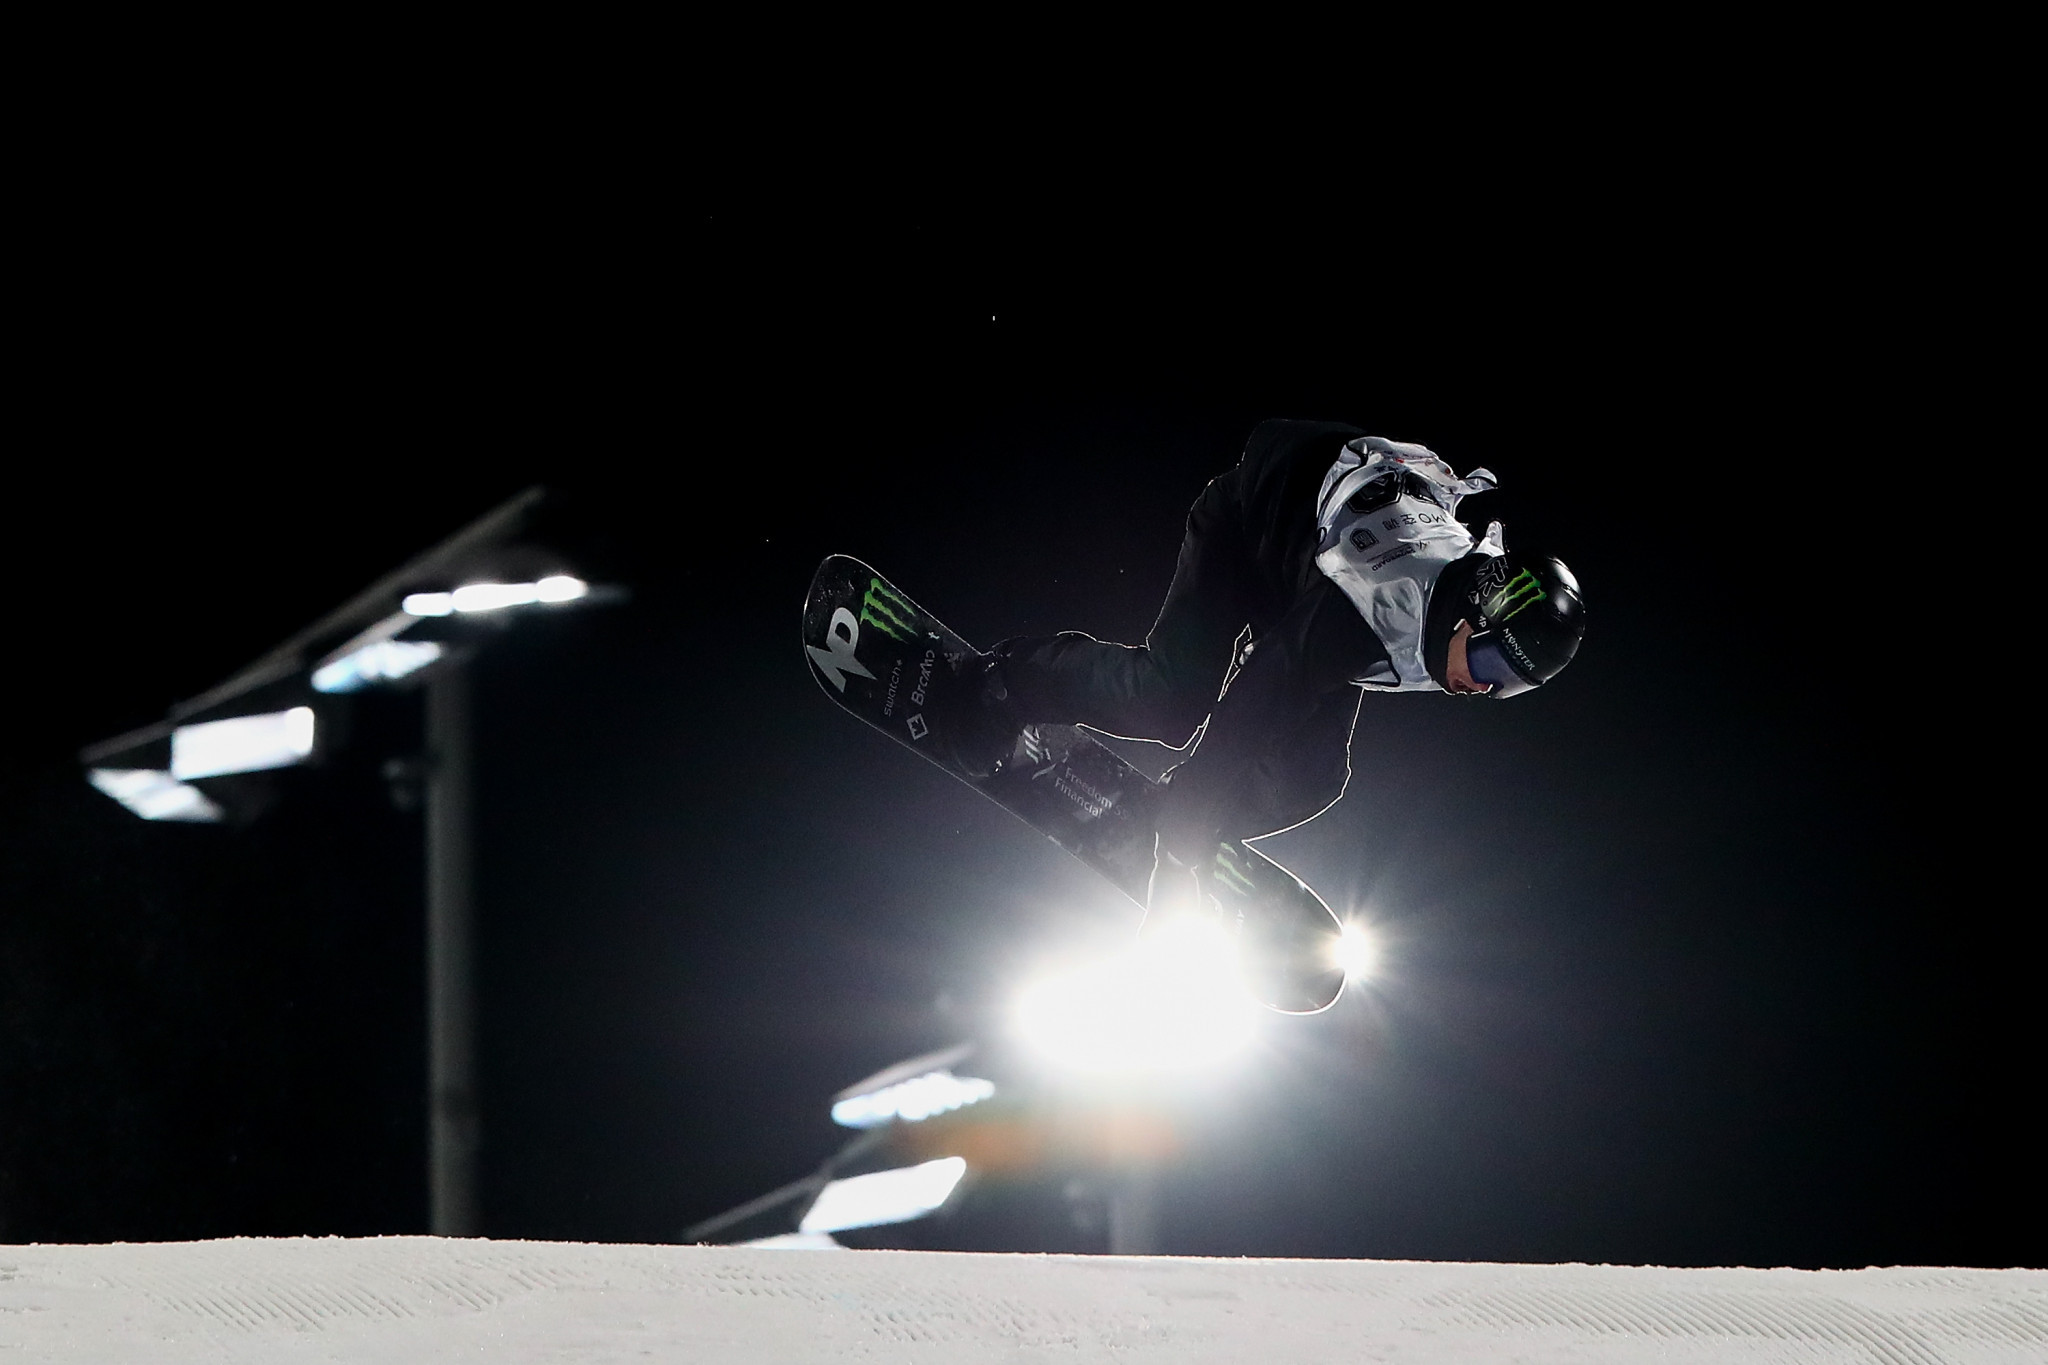 Max Parrot won the men's big air event last year in Beijing ©Getty Images